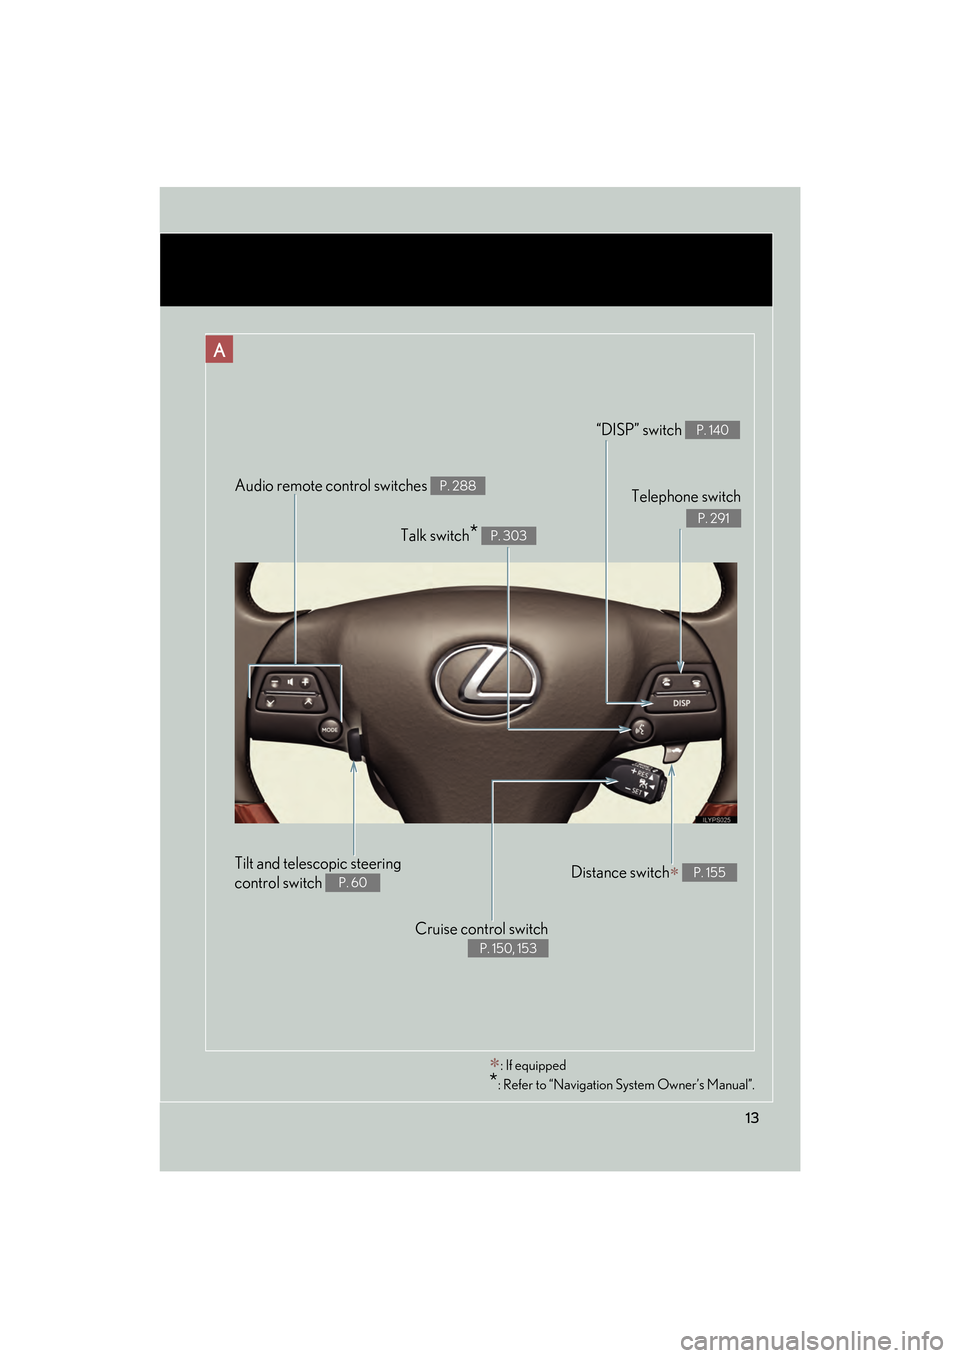 Lexus GS350 2008  Owners Manual 13
GS_G_U
June 19, 2008 12:54 pm
Audio remote control switches P. 288
Cruise control switch 
P. 150, 153
Telephone switch
P. 291
“DISP” switch P. 140
Distance switch∗ P. 155
Talk switch* P. 303
